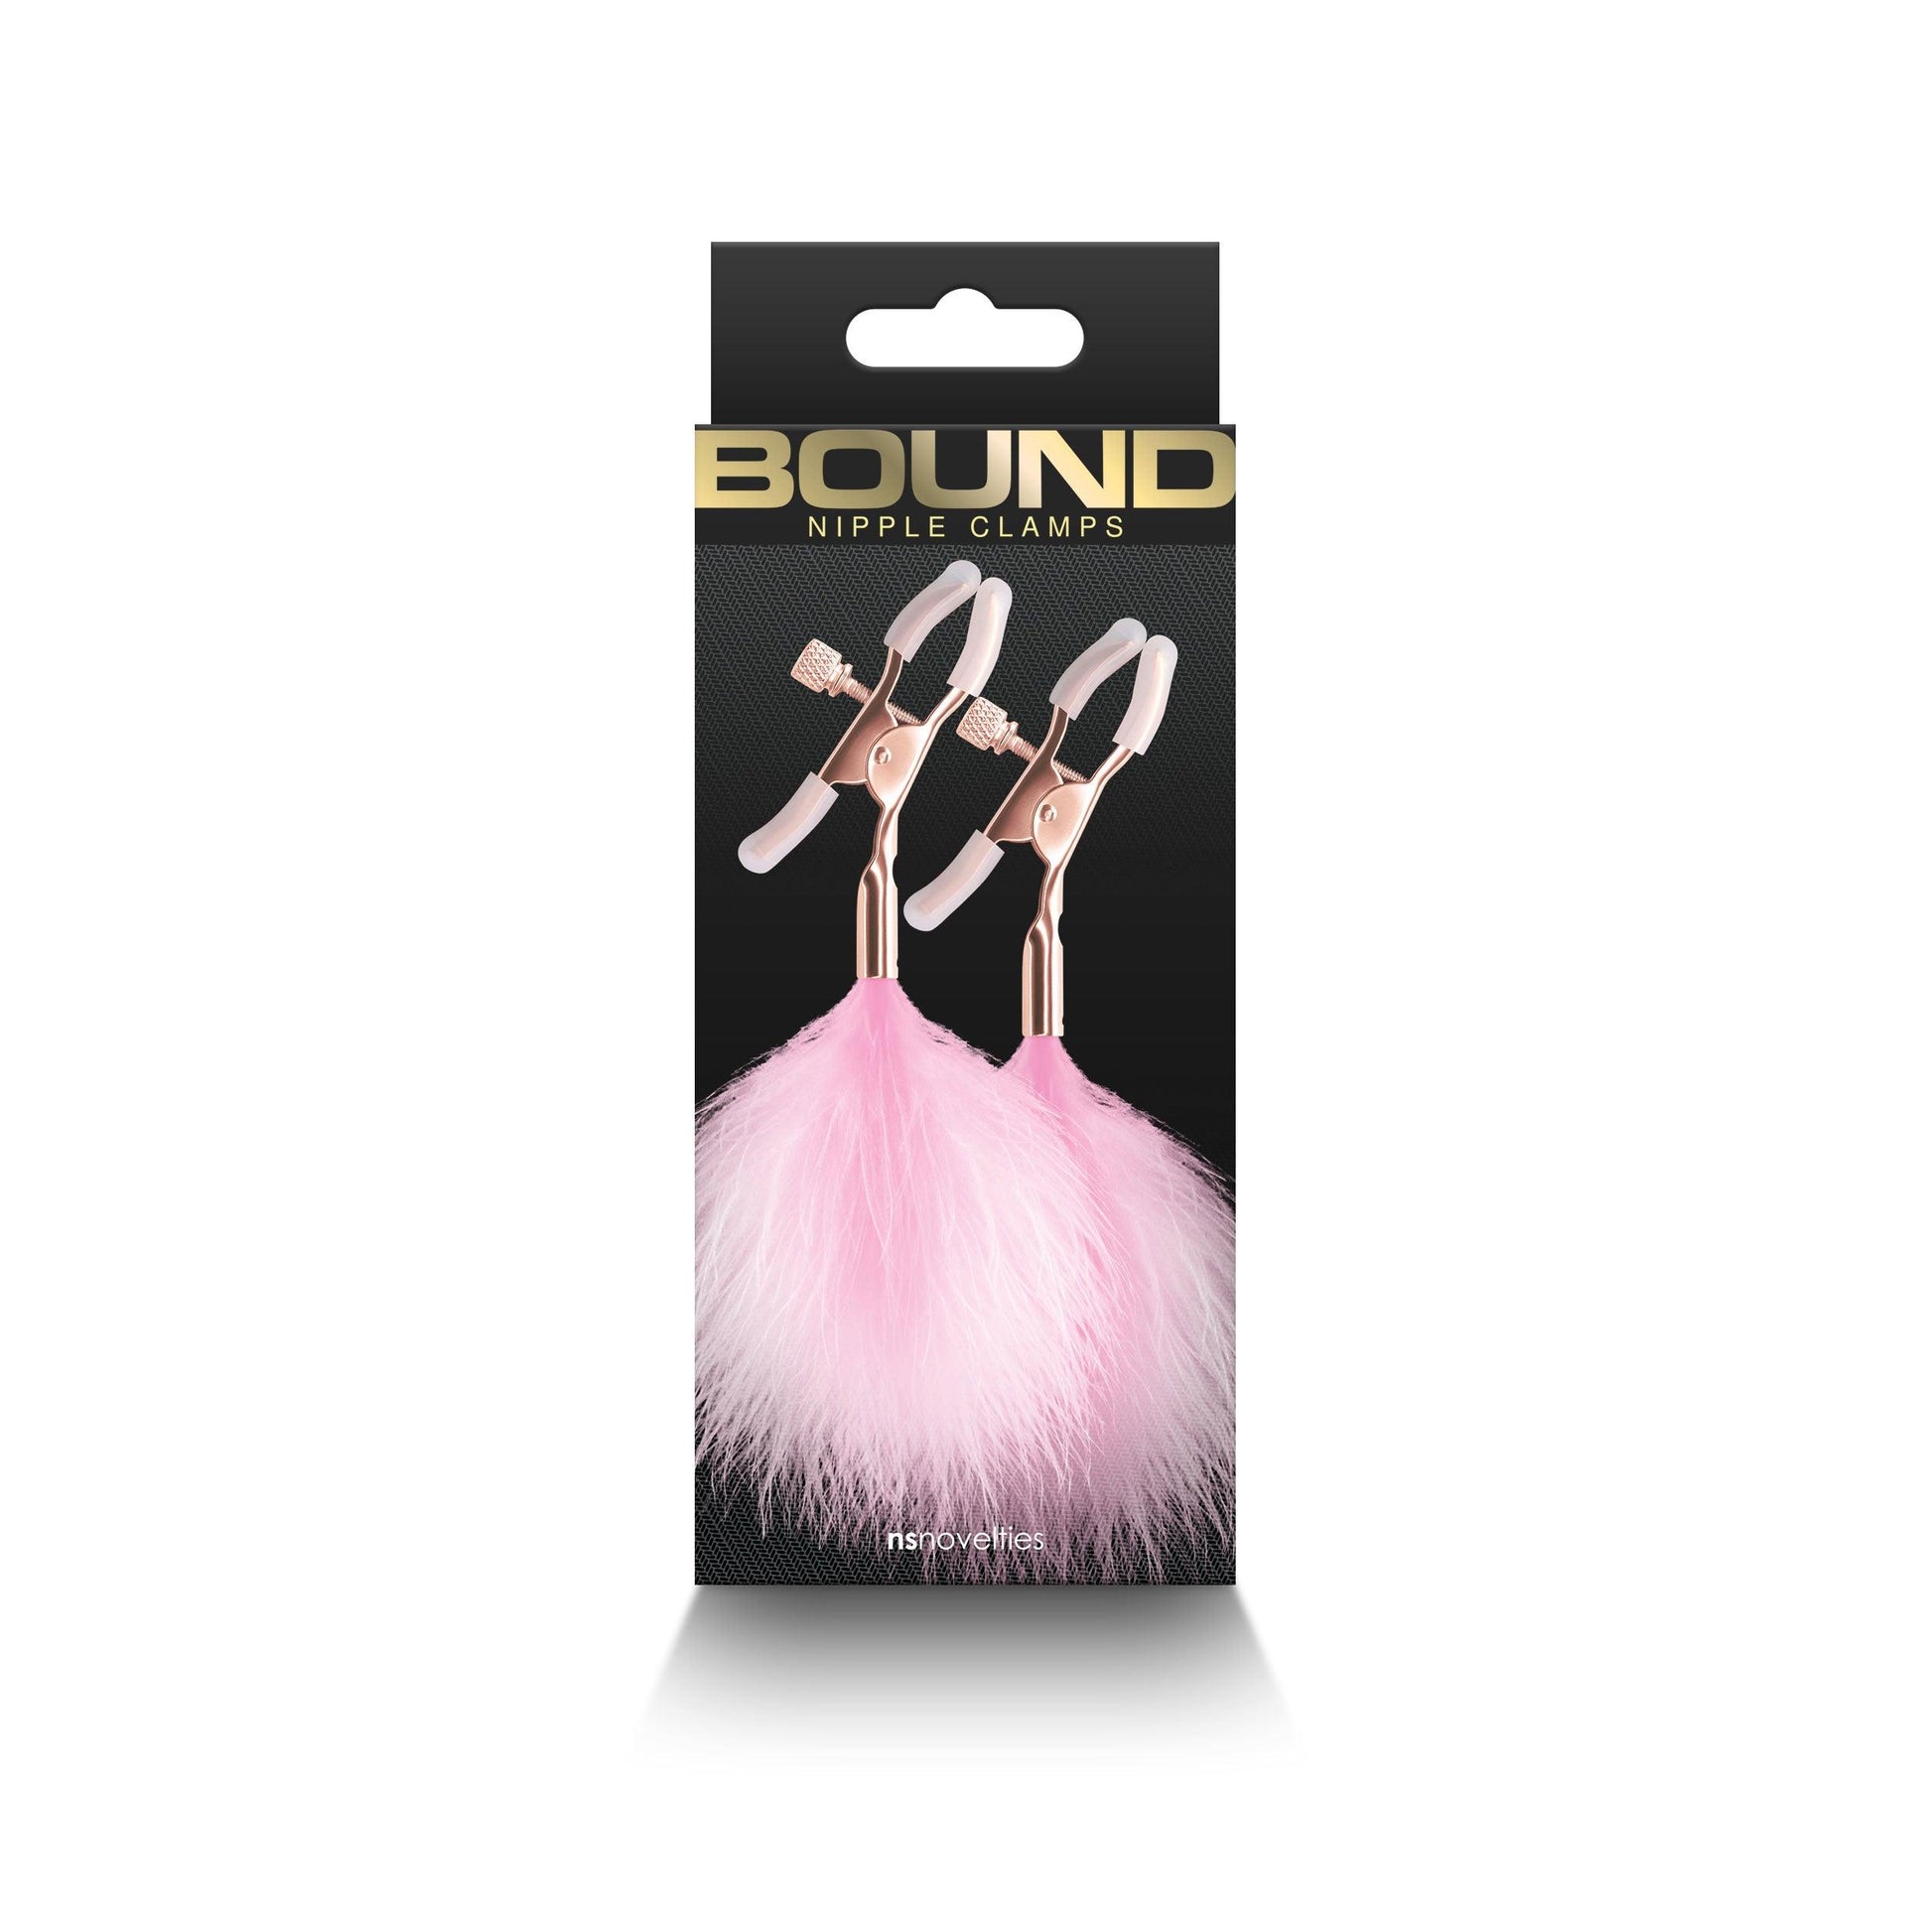 Bound - Nipple Clamps - F1 - Pink - My Sex Toy Hub